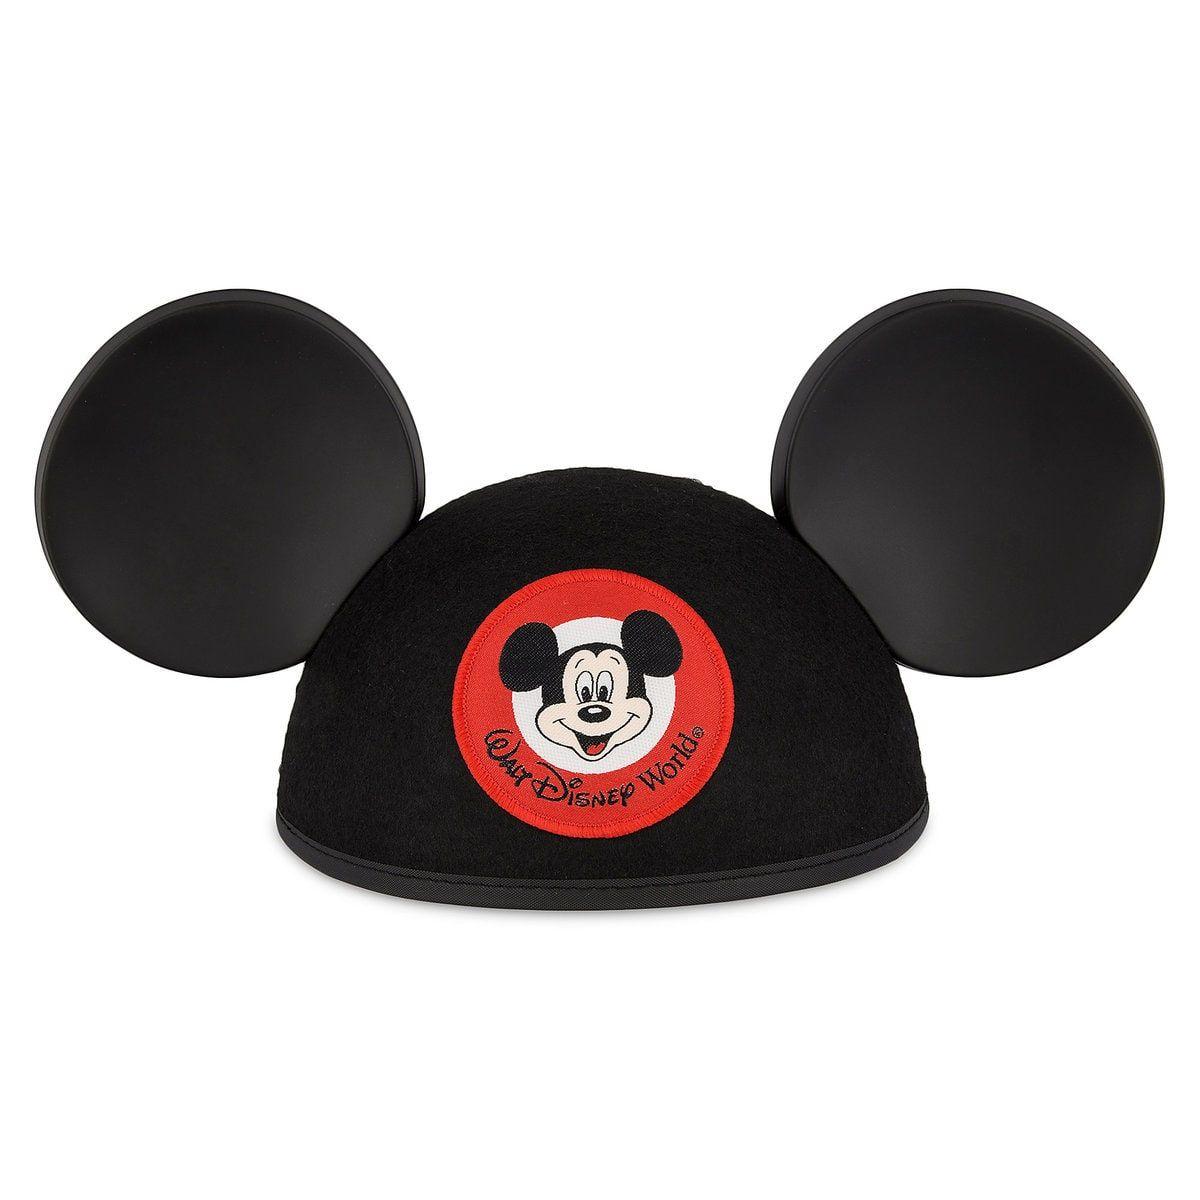 Mouseketeer Logo - Mouseketeer Ear Hat for Adults - The Mickey Mouse Club - Walt Disney World  - Personalizable